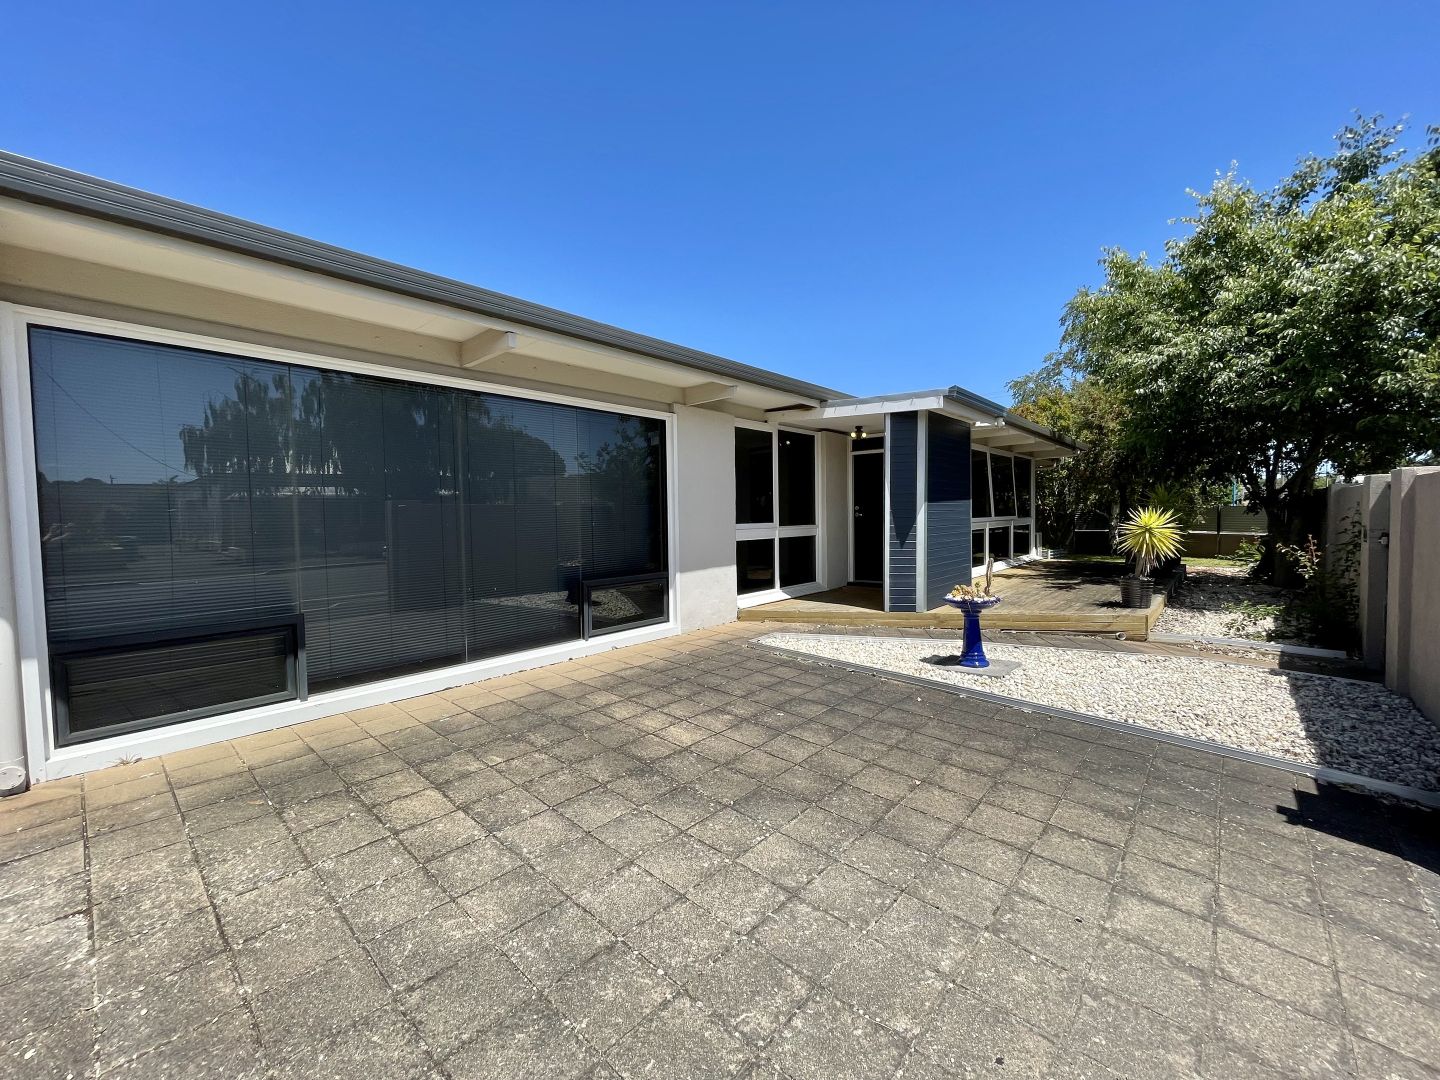 10 Crouch Street North, Mount Gambier SA 5290